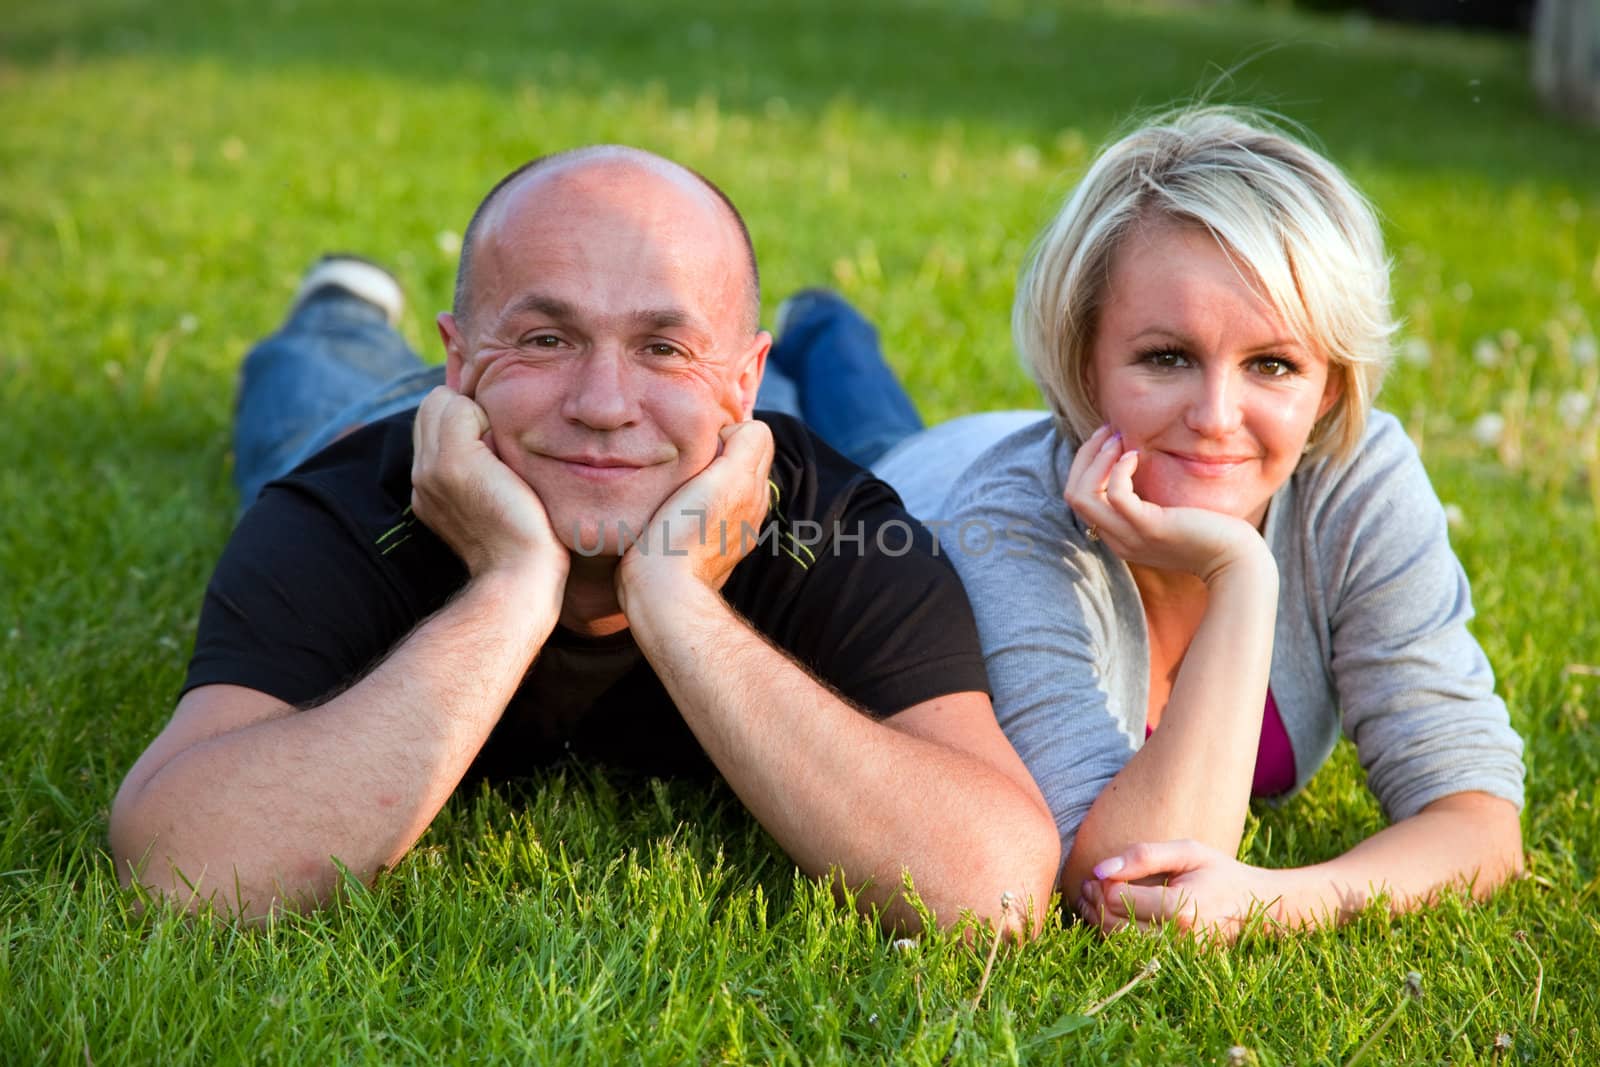 Adult happy couple together on grass by photocreo